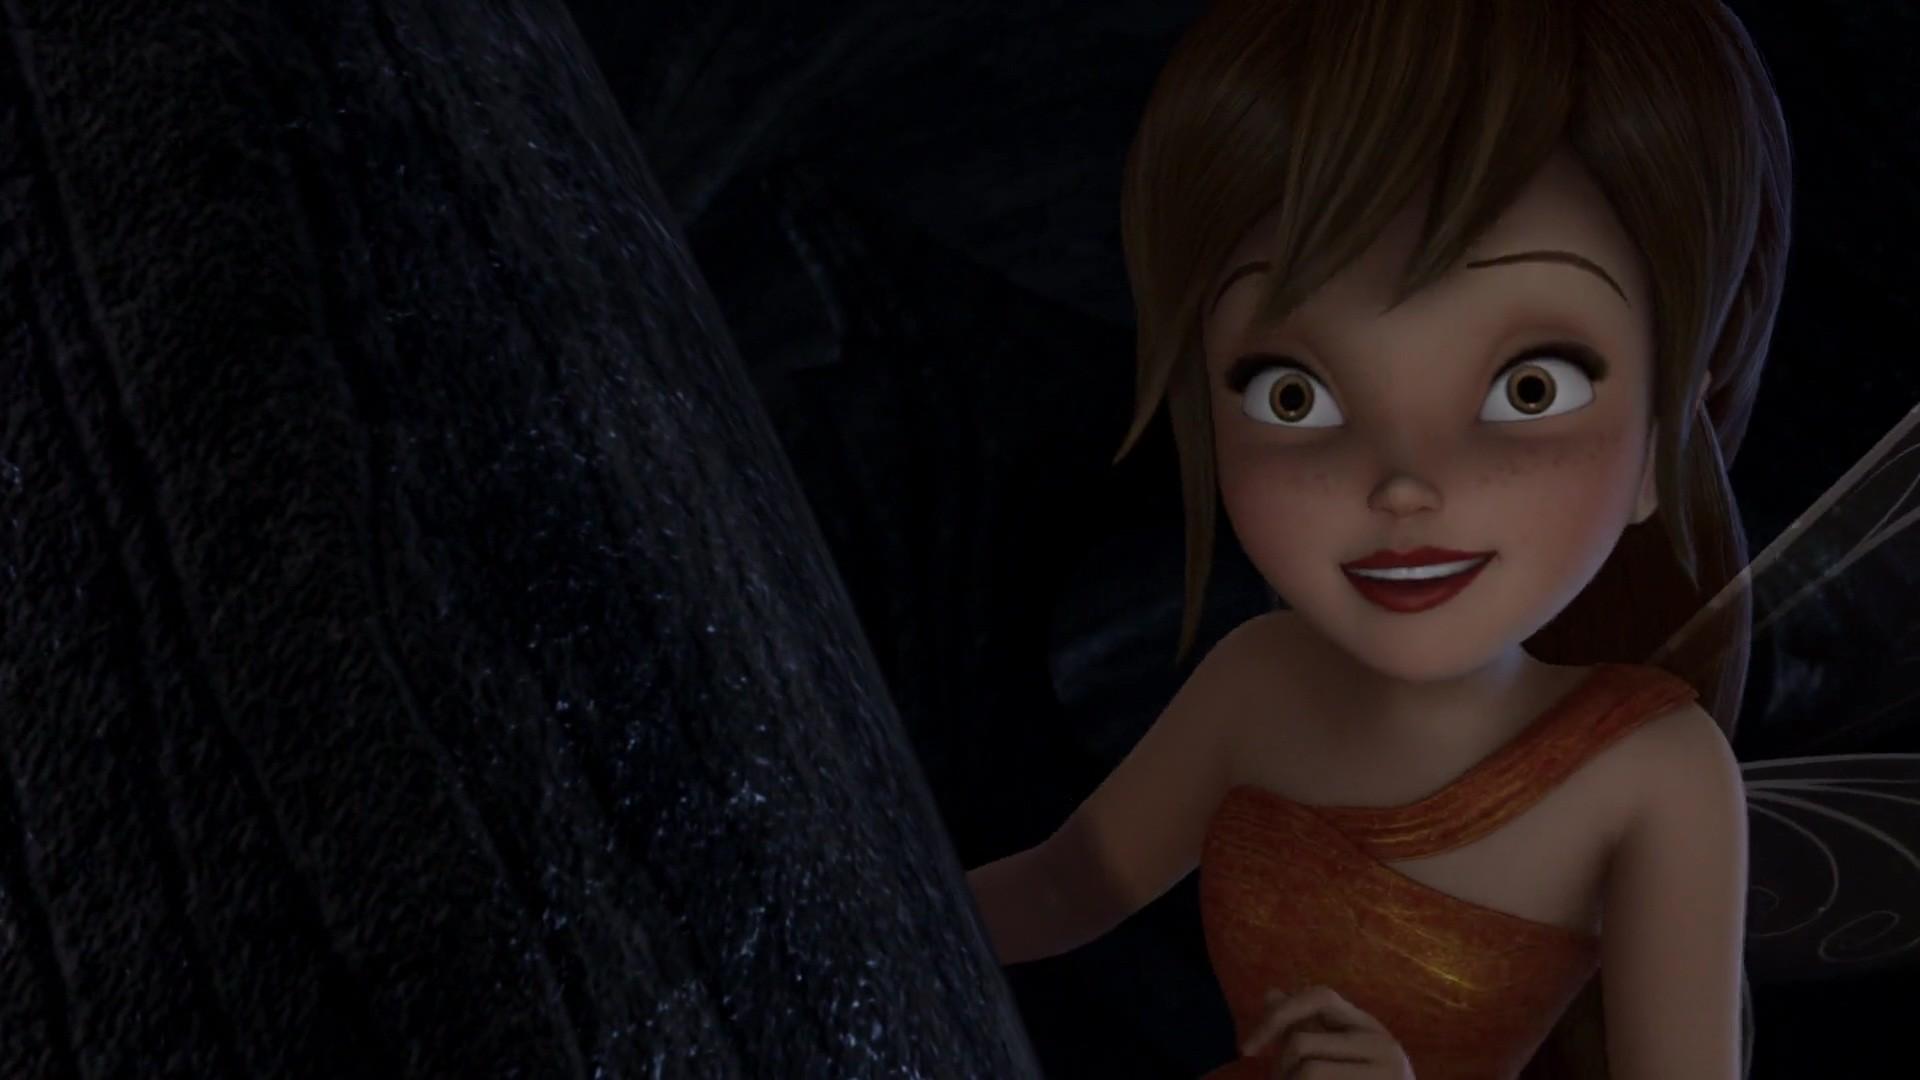 HD wallpaper, Animated Movies, Tinkerbell, Movies